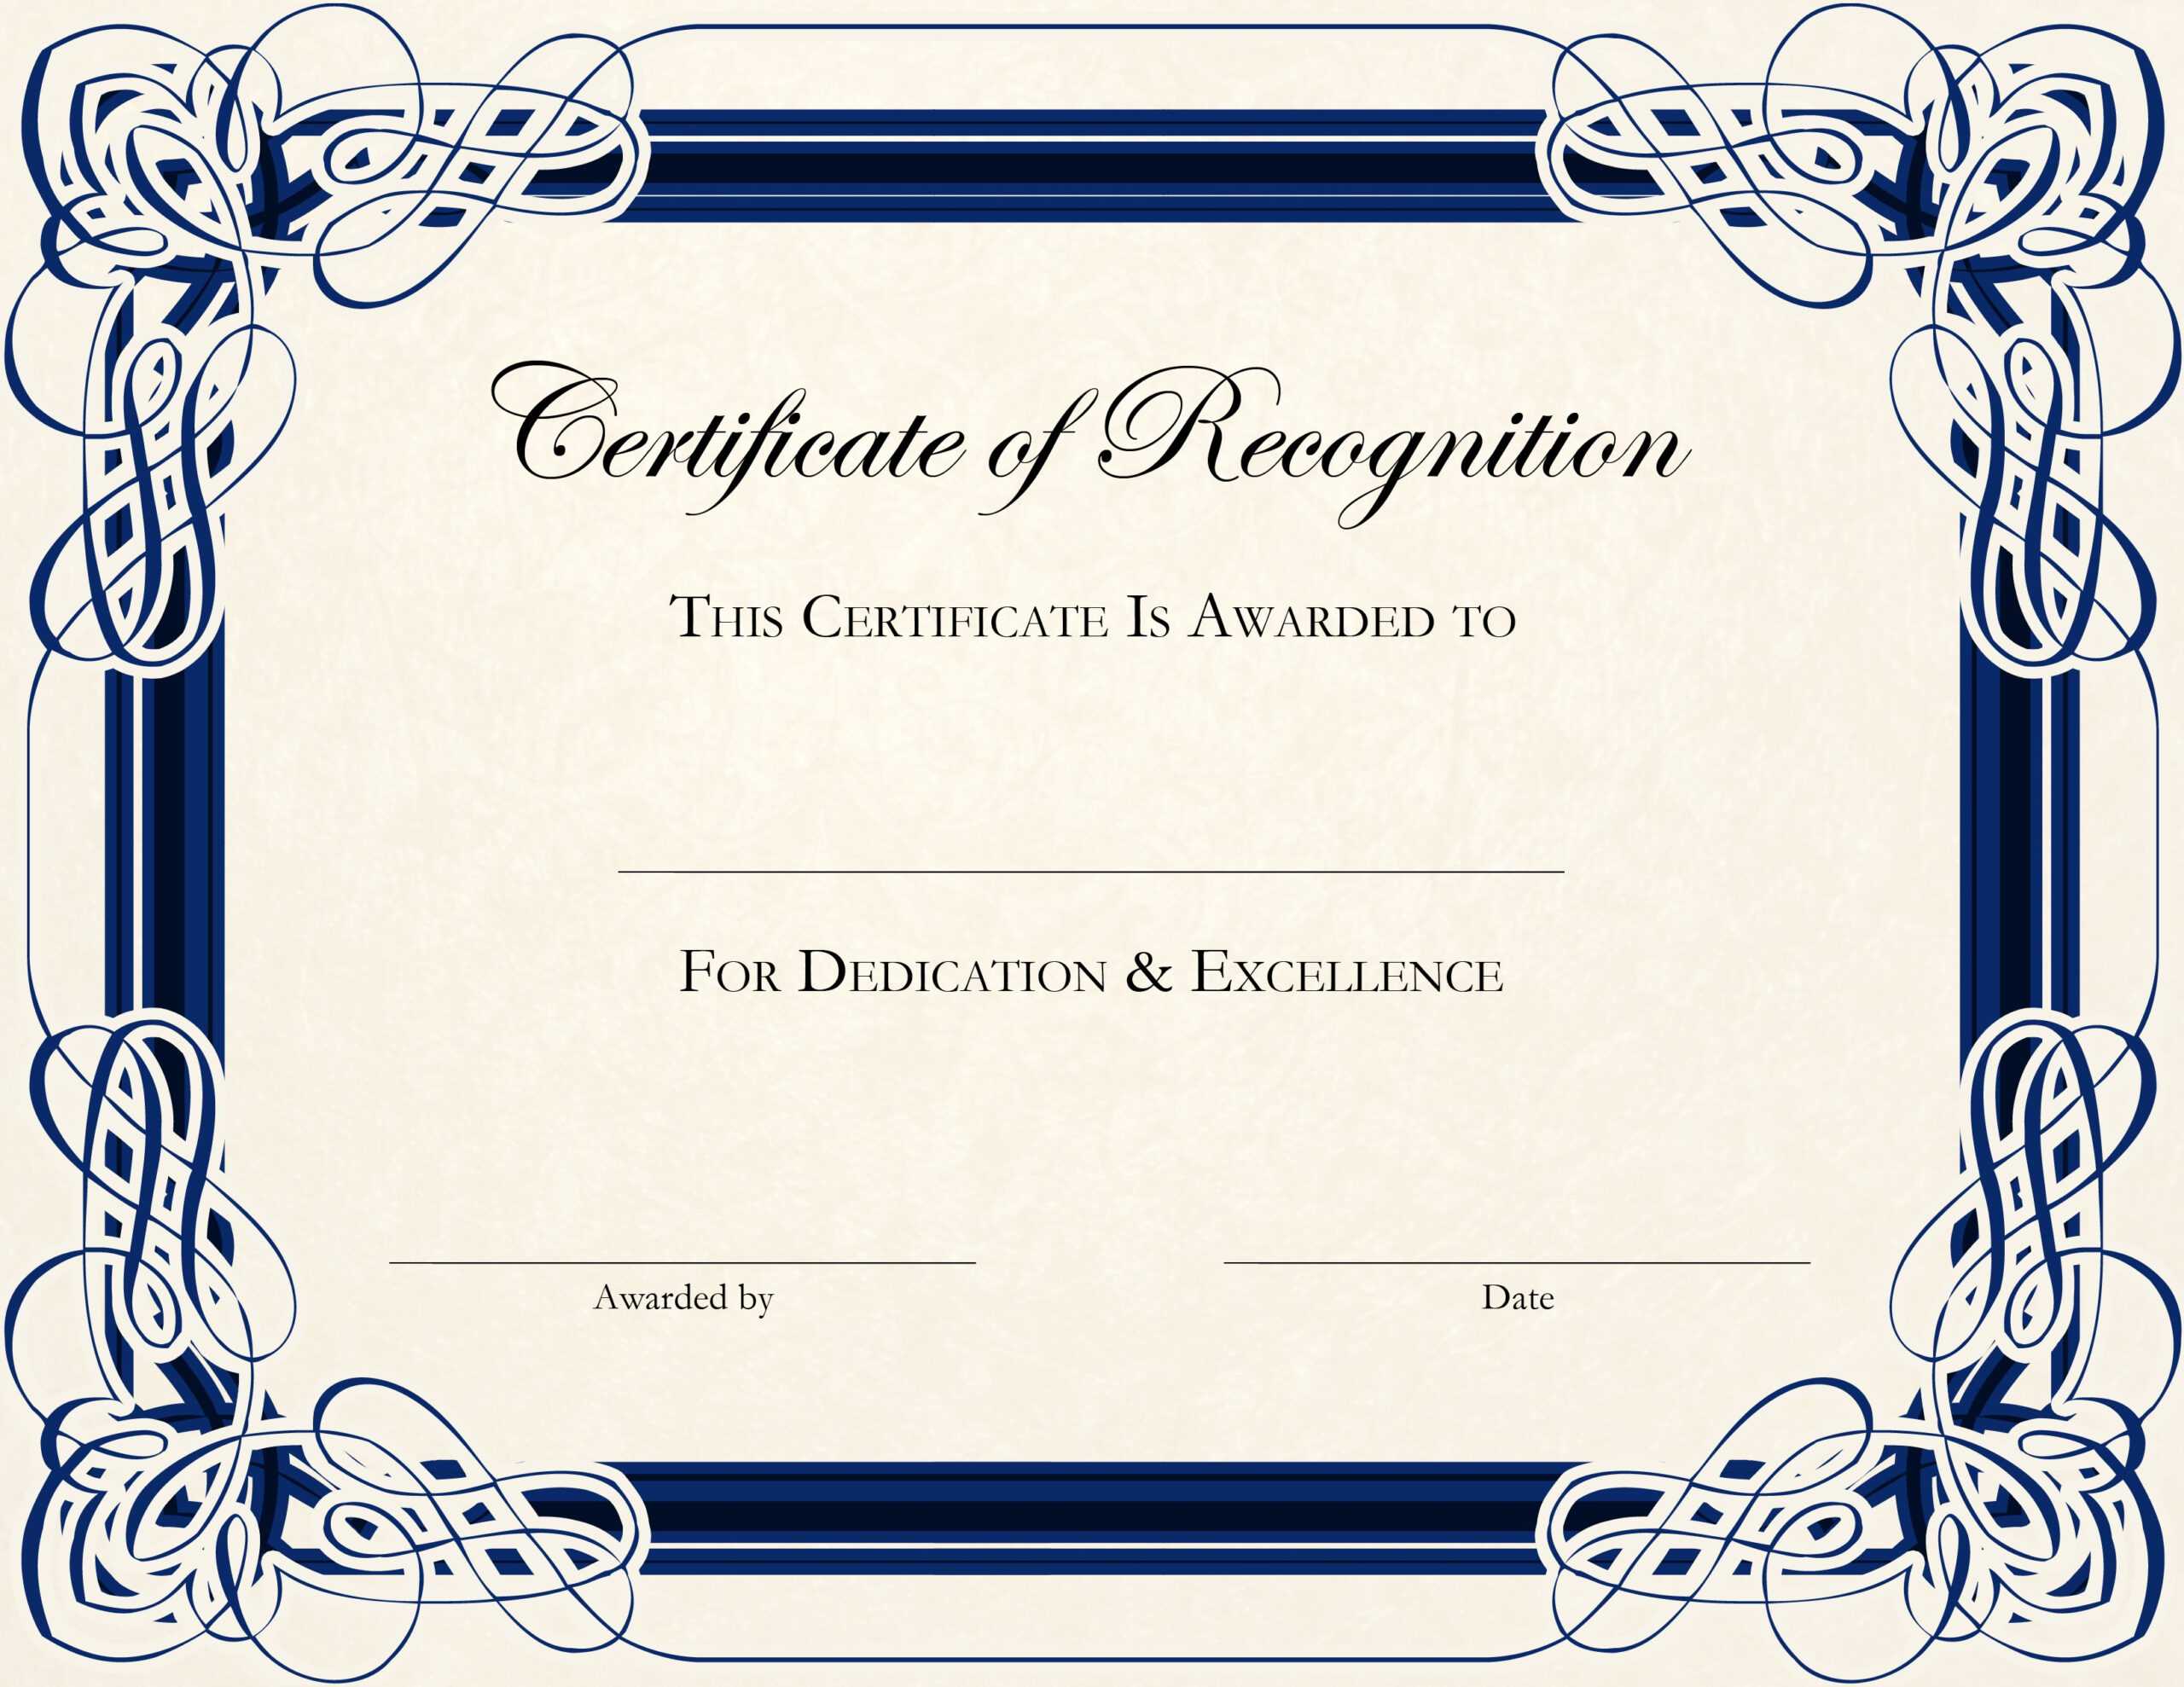 Felicitation Certificate Template Awesome Top Result Ged For Felicitation Certificate Template